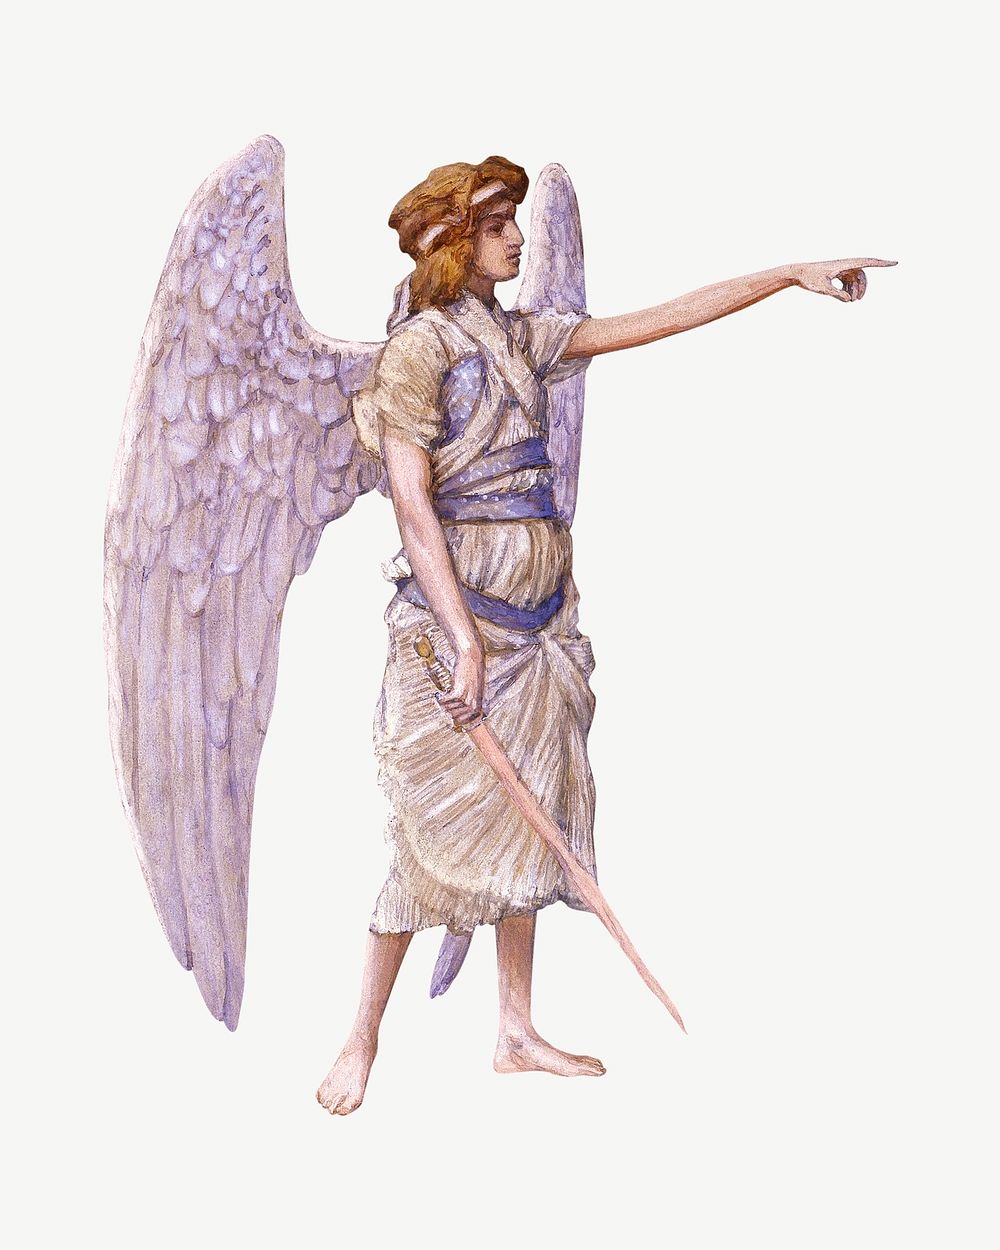 Vintage angel illustration. Remixed by rawpixel.